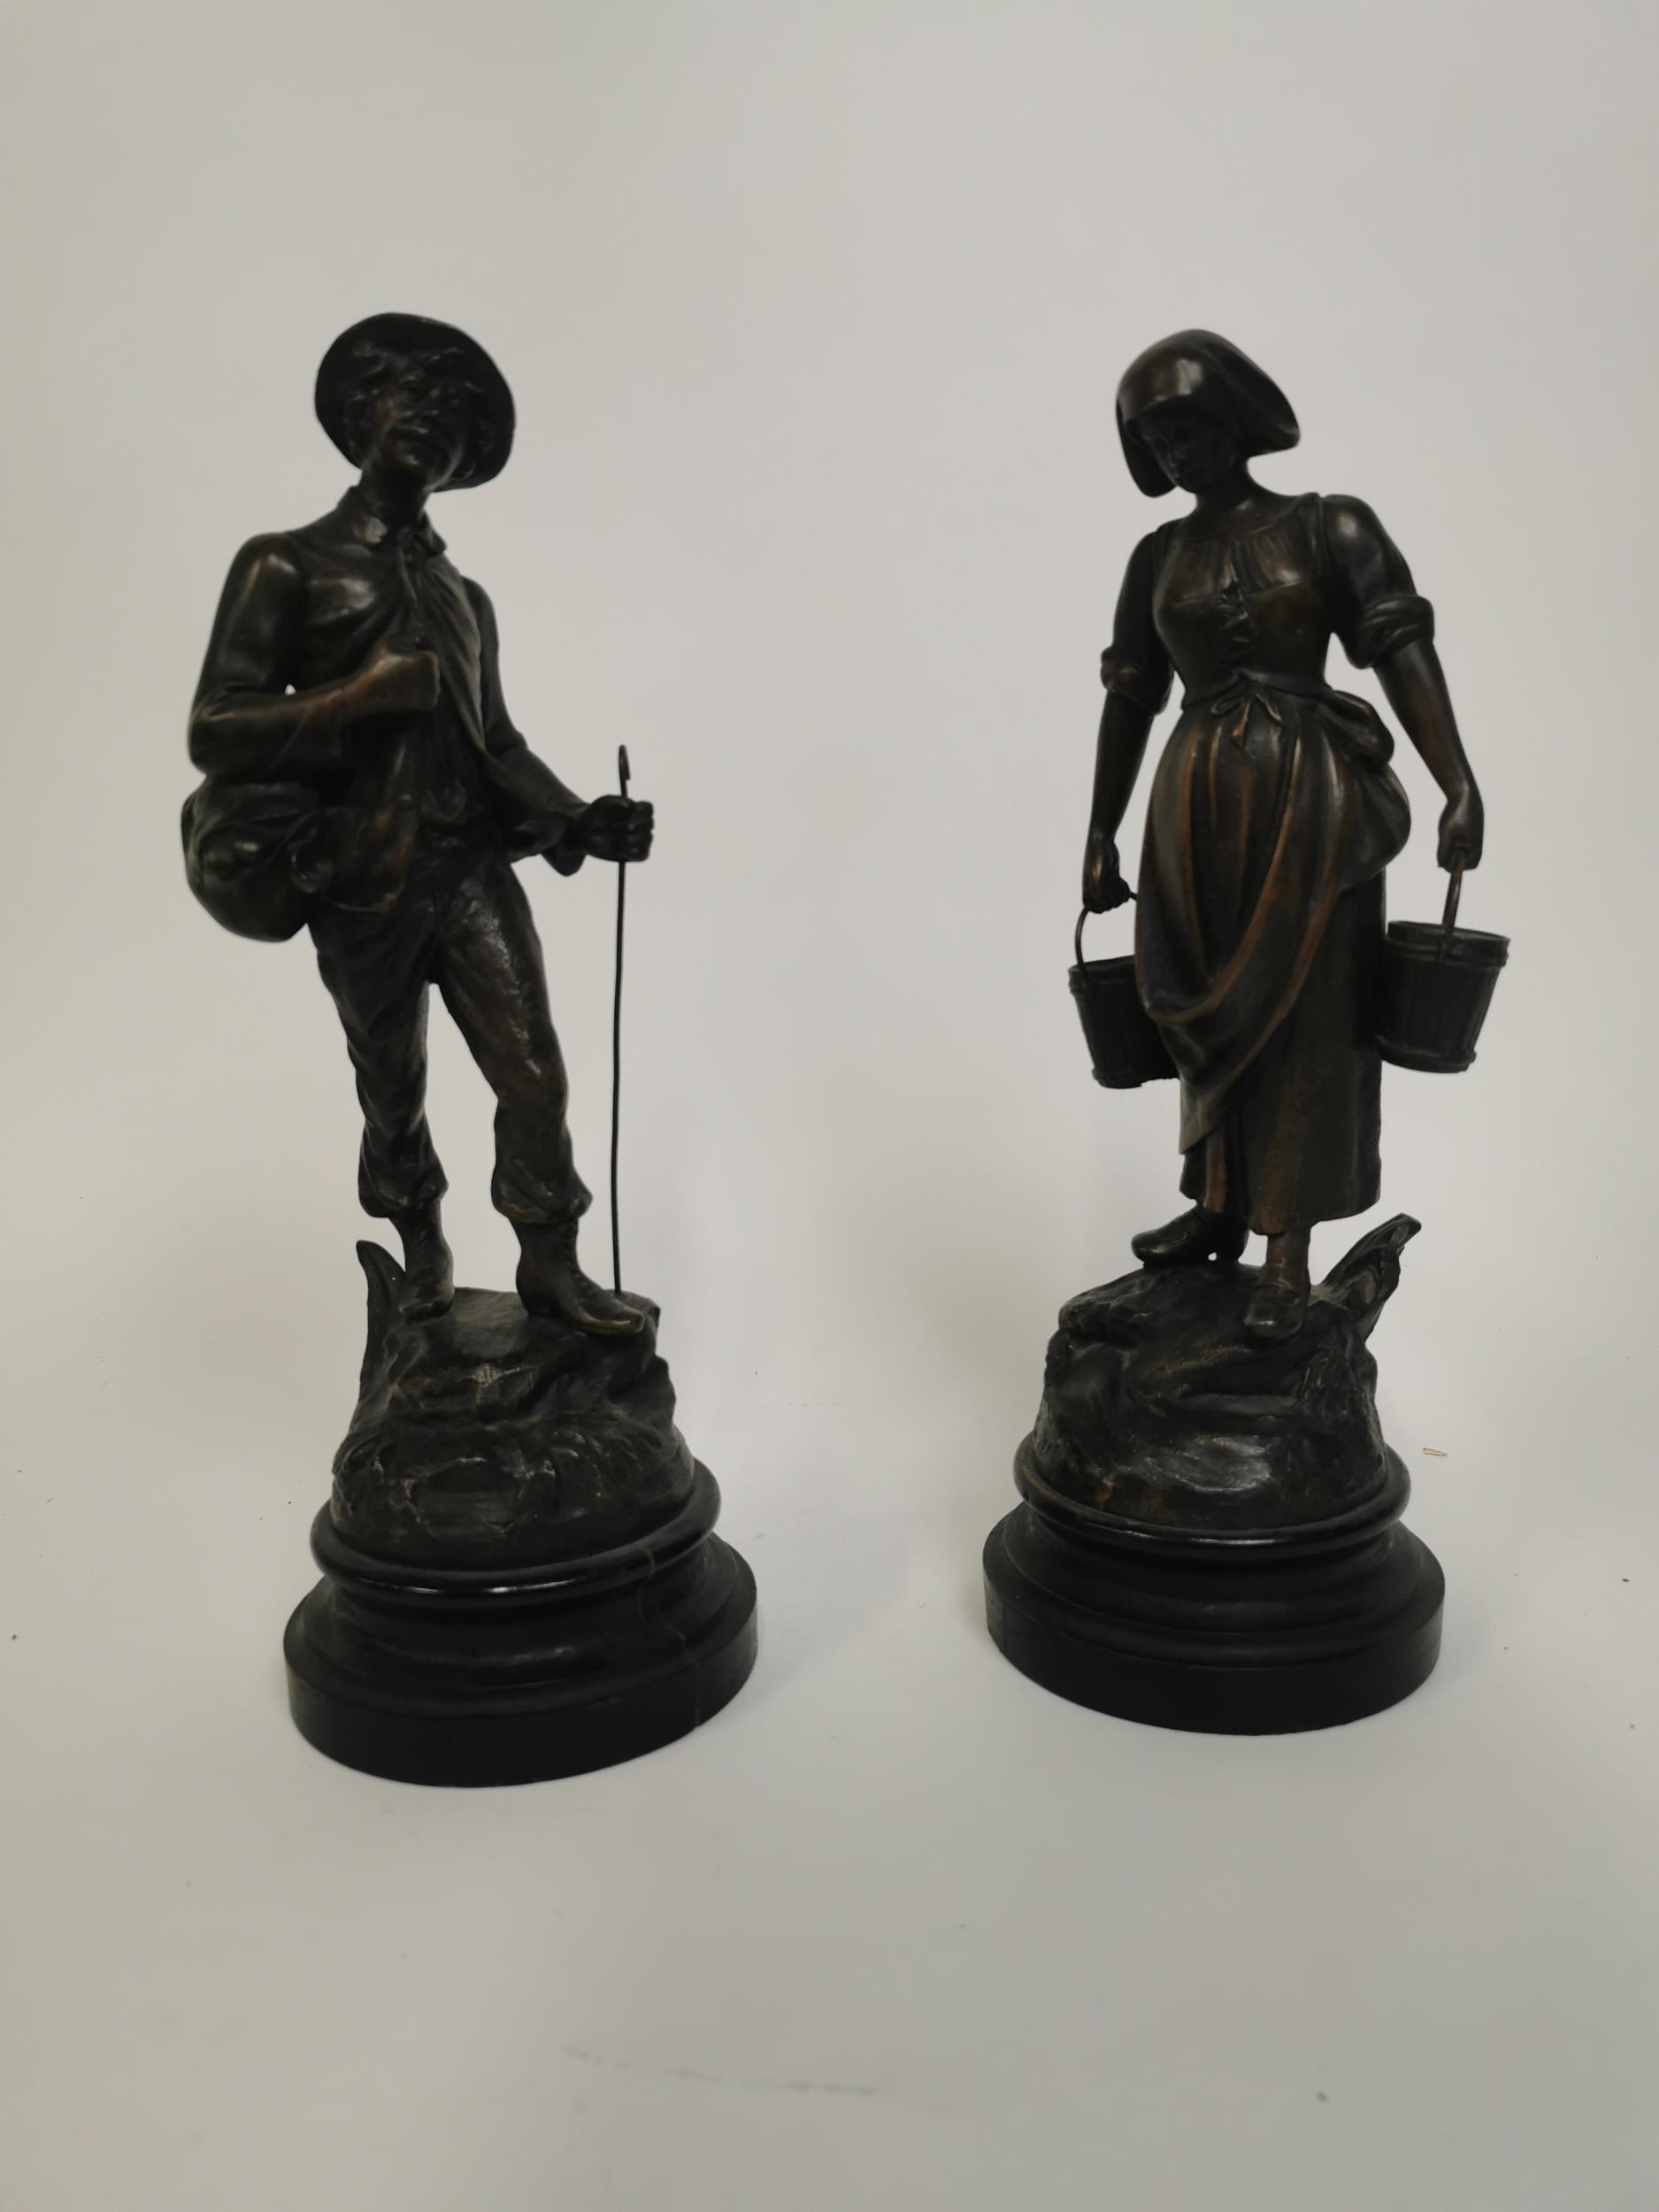 Pair of bronzed spelter figures of Man and Lady. Man {37 cm H x 12 cm Dia} and Lady {35 cm H x 12 cm